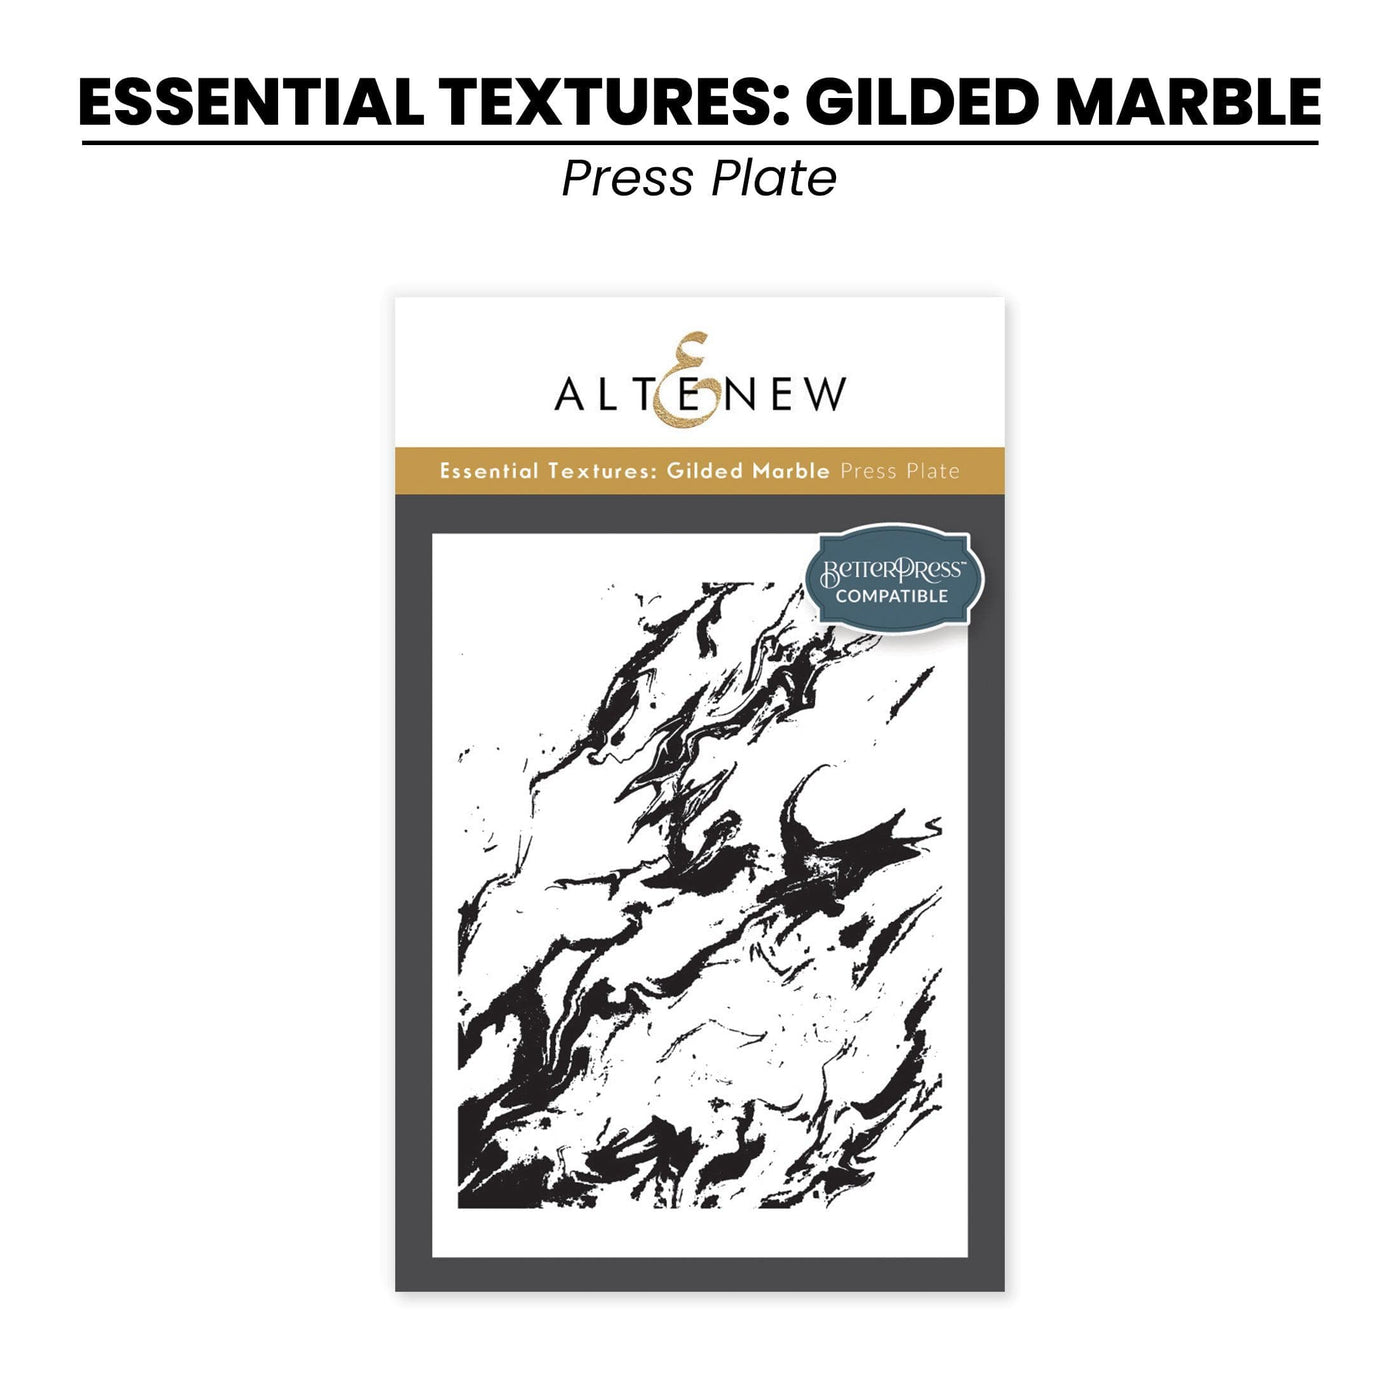 Essential Textures: Gilded Marble Press Plate